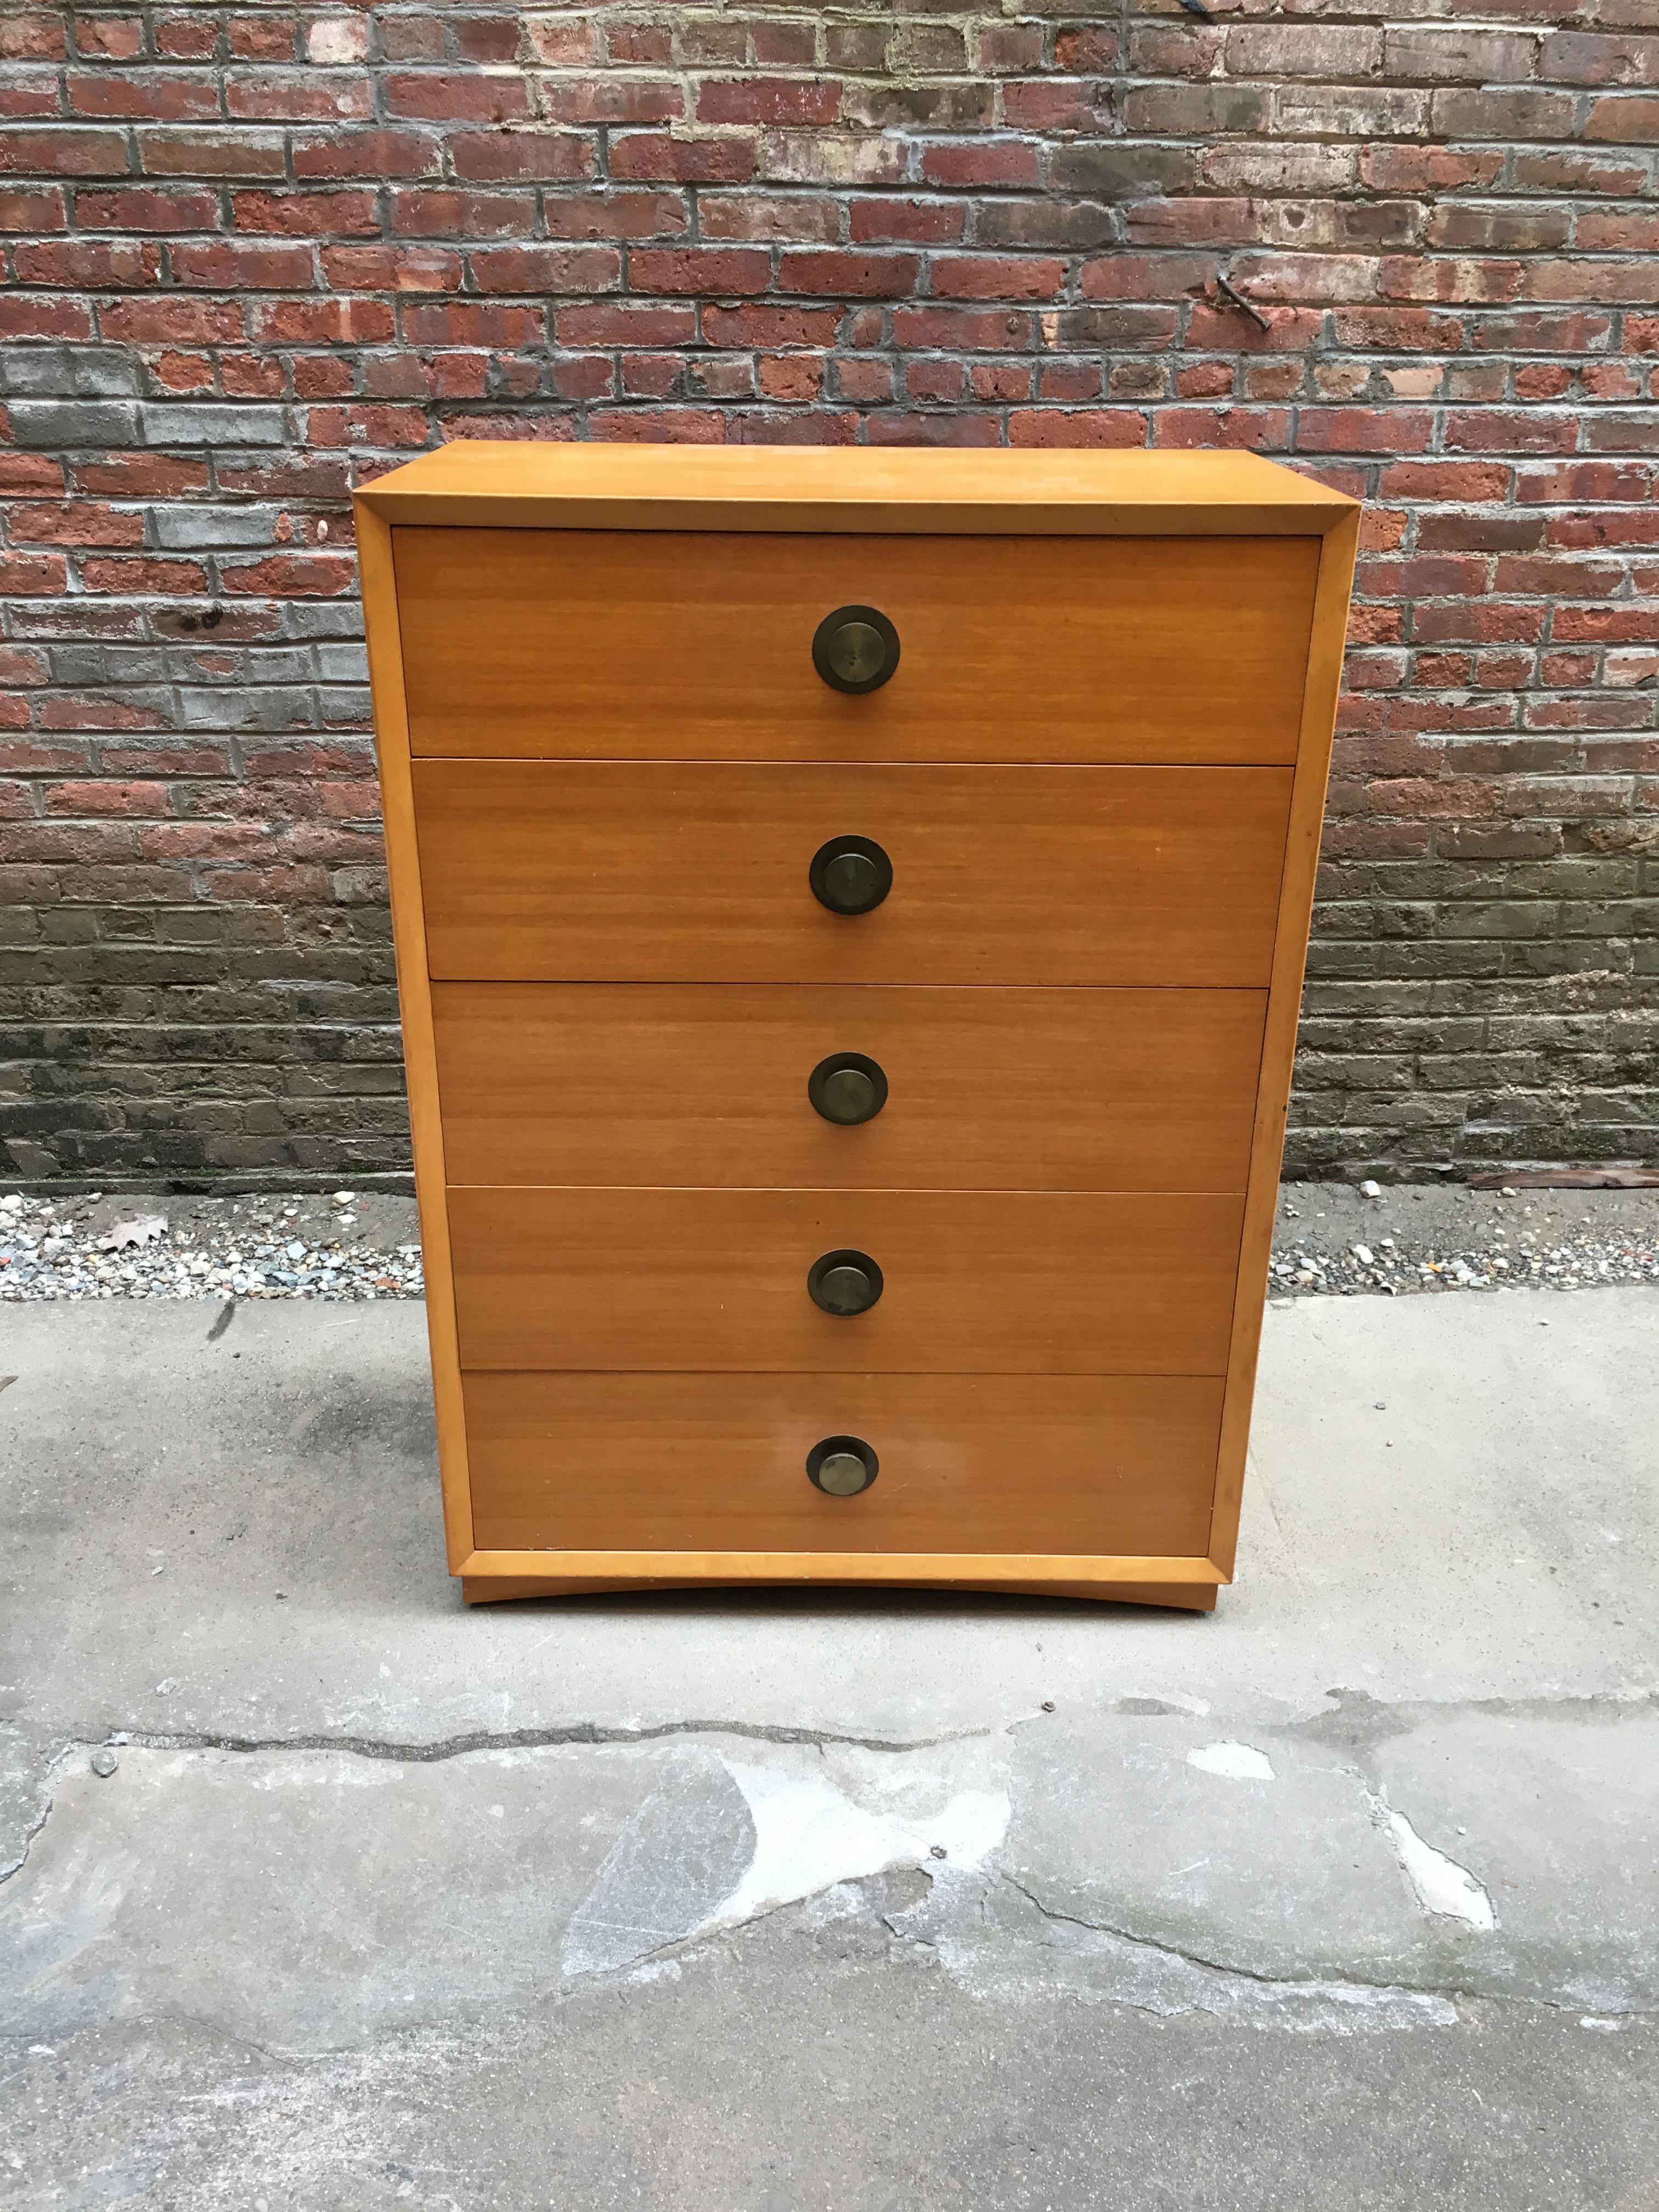 Gorgeous and simple elegance Thomasville Chair Company dresser. Tall five drawer dresser features round center pulls, drawer dividers in the top two drawers and concave shaped plinth base, circa 1940-1950. Original finish. Possibly elm or birch